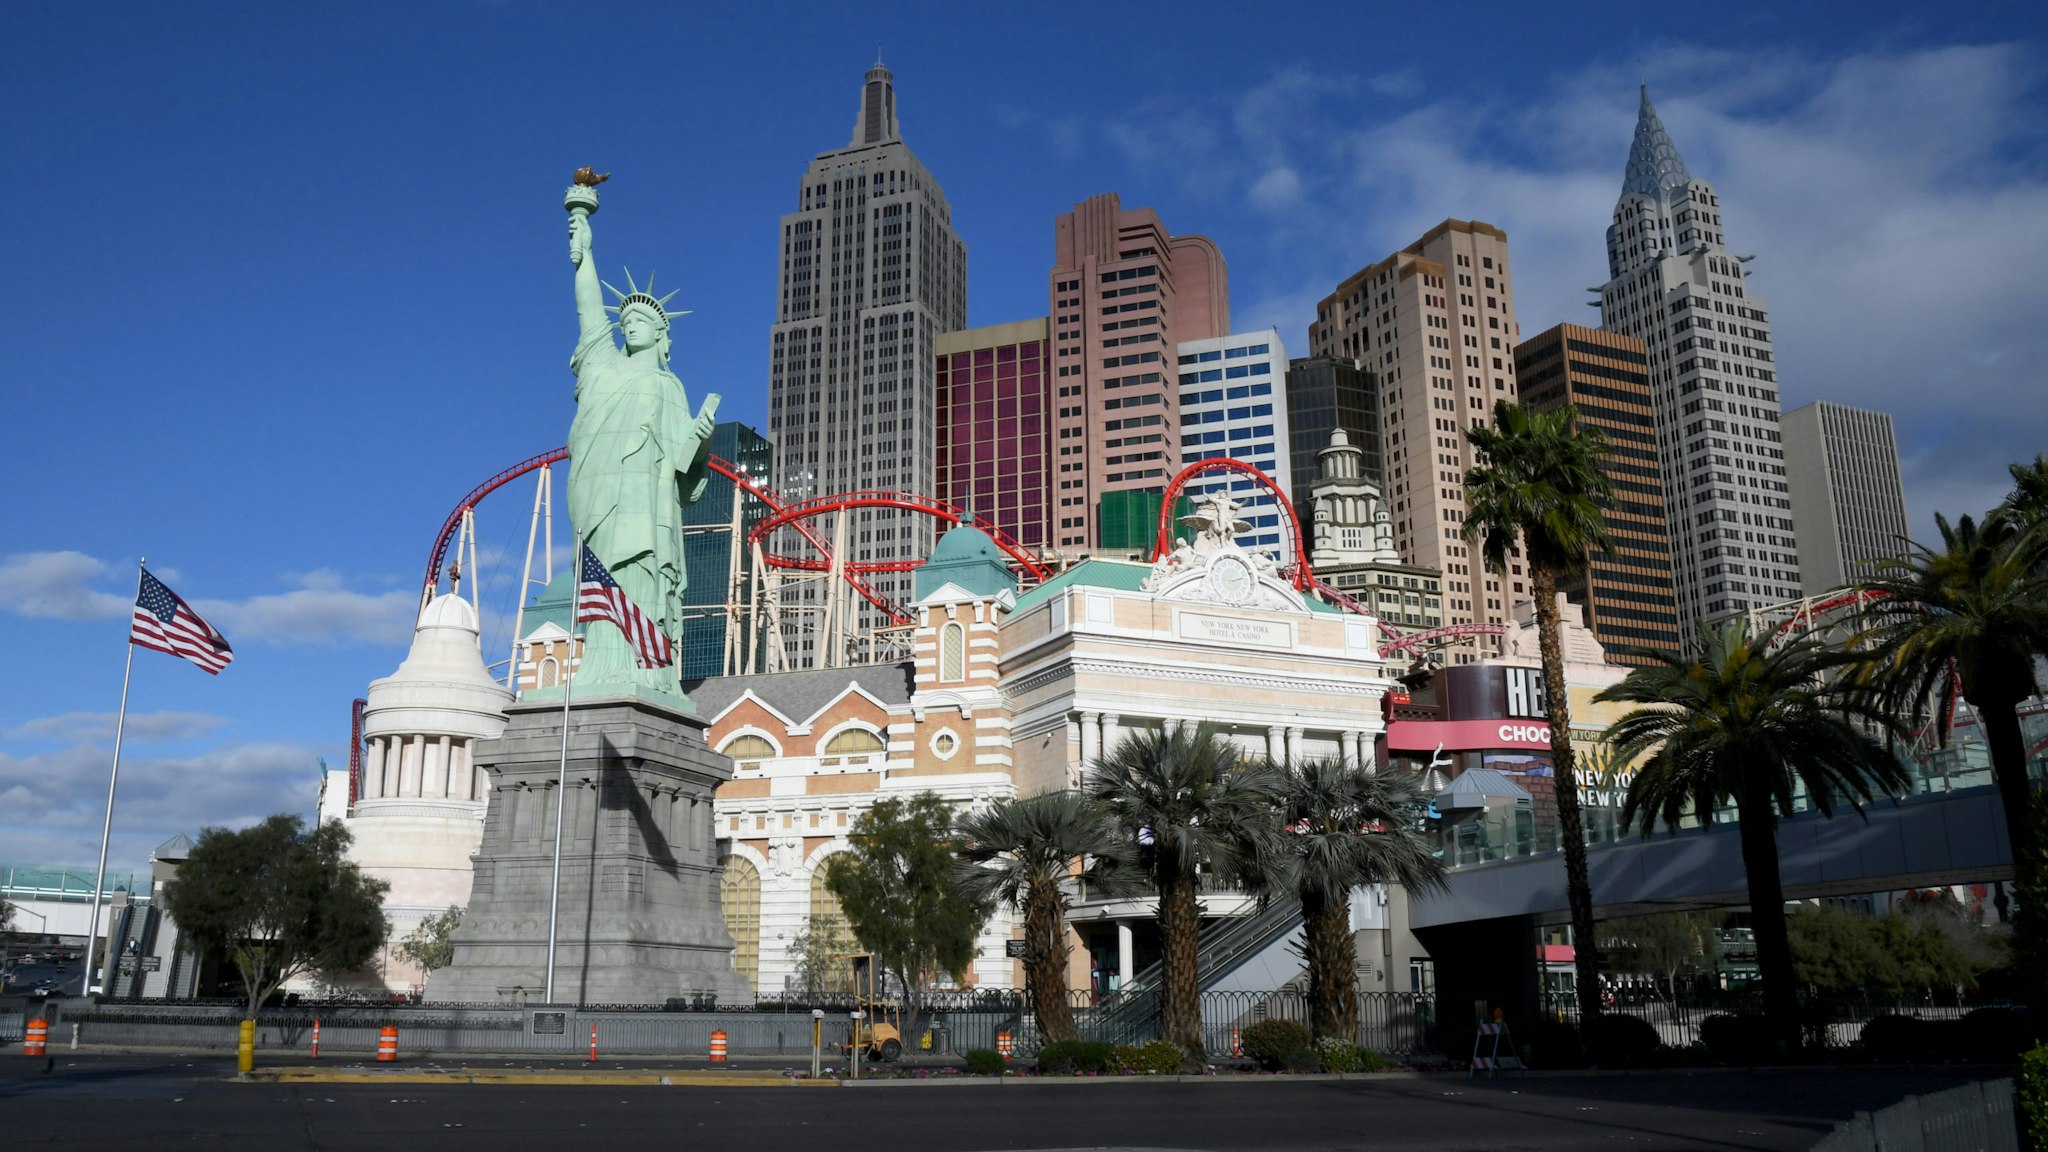 LAS VEGAS, NEVADA - MARCH 17: An exterior view shows the New York-New York Hotel & Casino after the Las Vegas Strip resort was closed as the coronavirus continues to spread across the United States on March 17, 2020 in Las Vegas, Nevada. MGM Resorts International, which owns the New York-New York, suspended operations at all of its Las Vegas properties until further notice to combat the spread of the virus. The World Health Organization declared the coronavirus (COVID-19) a global pandemic on March 11th. (Photo by Ethan Miller/Getty Images)